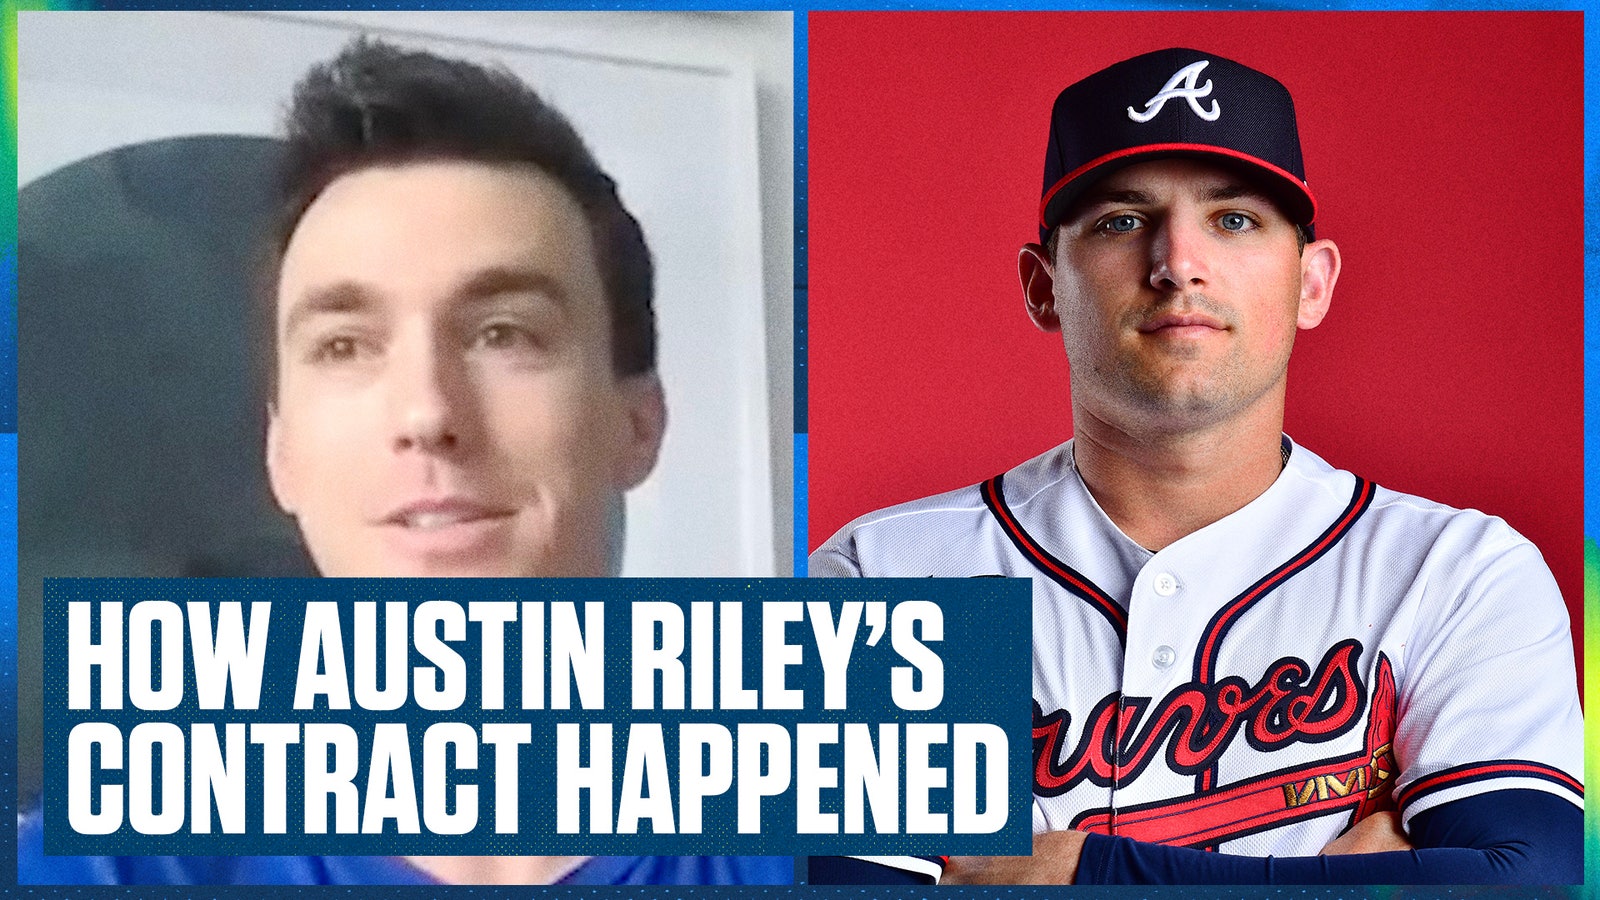 How the Atlanta Braves approached Austin Riley to offer a contract extension